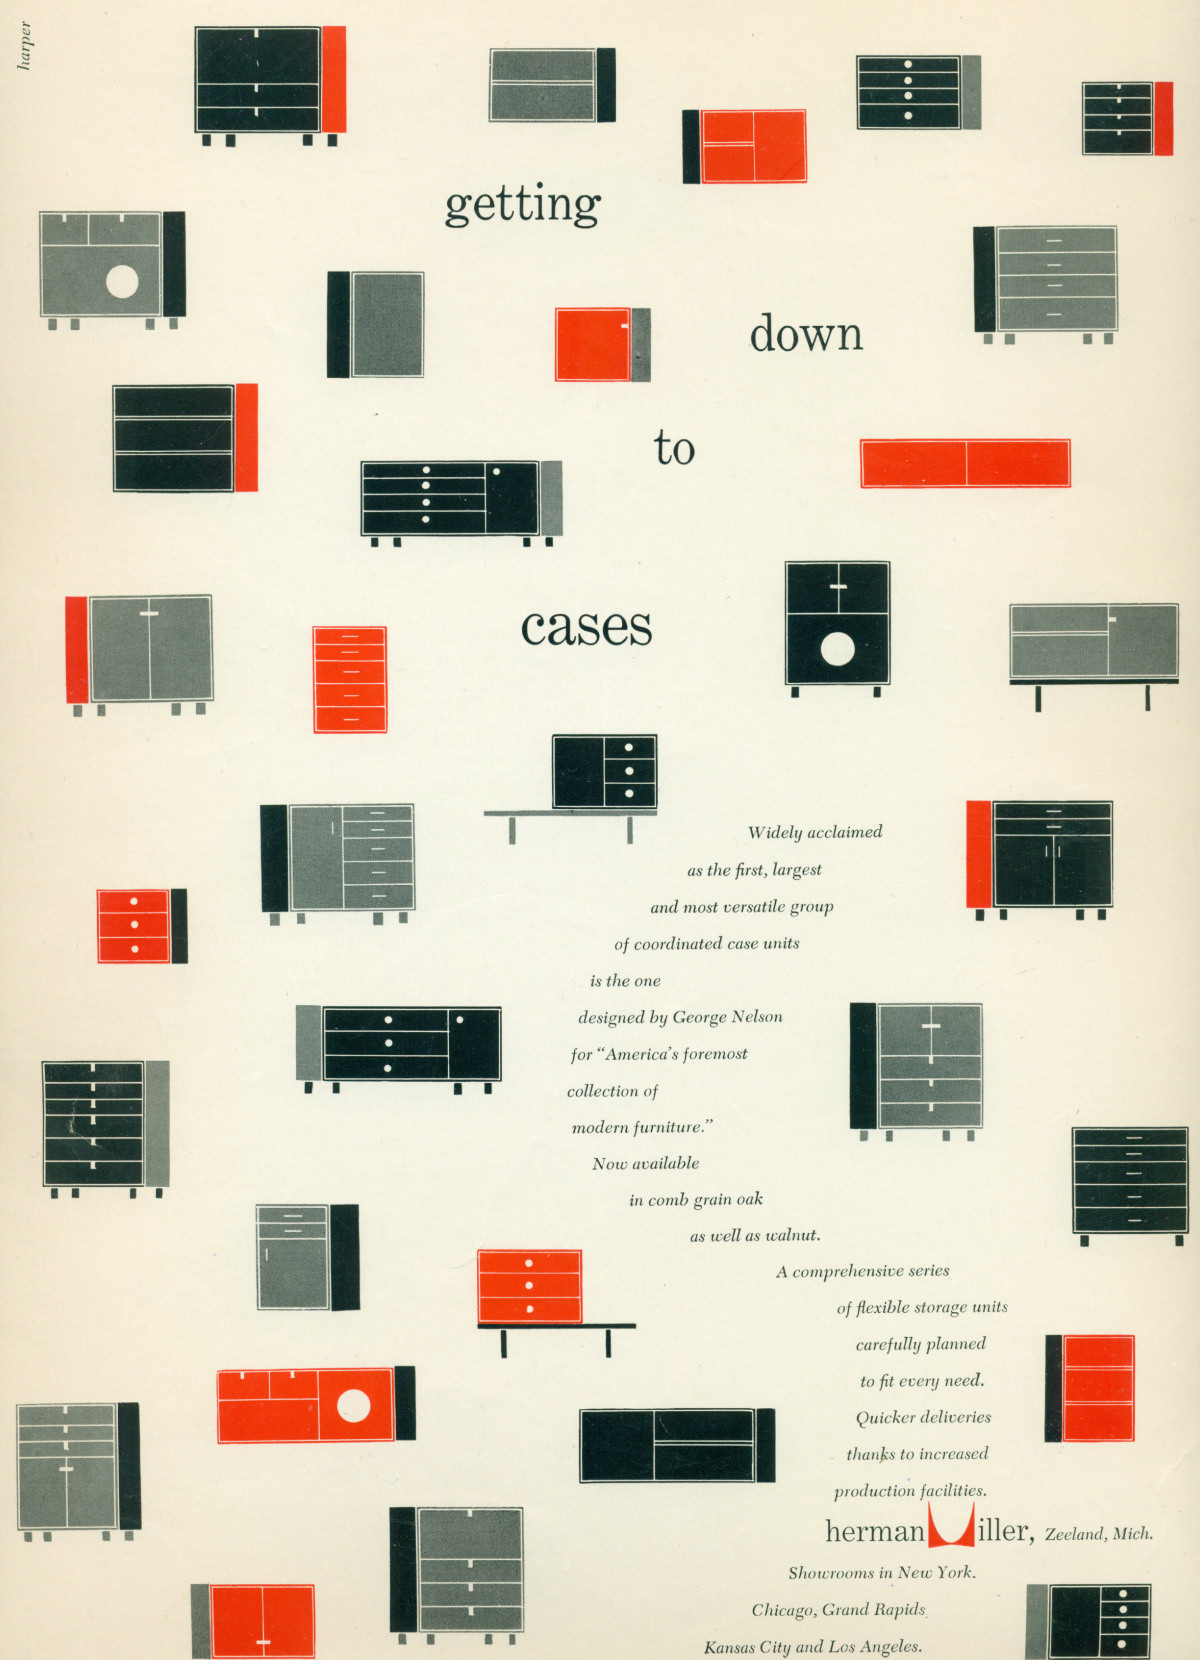 Red, black and grey graphic renderings of various combinations of the Nelson Basic Cabinet Series surround promotional text that curves through the advertisement.